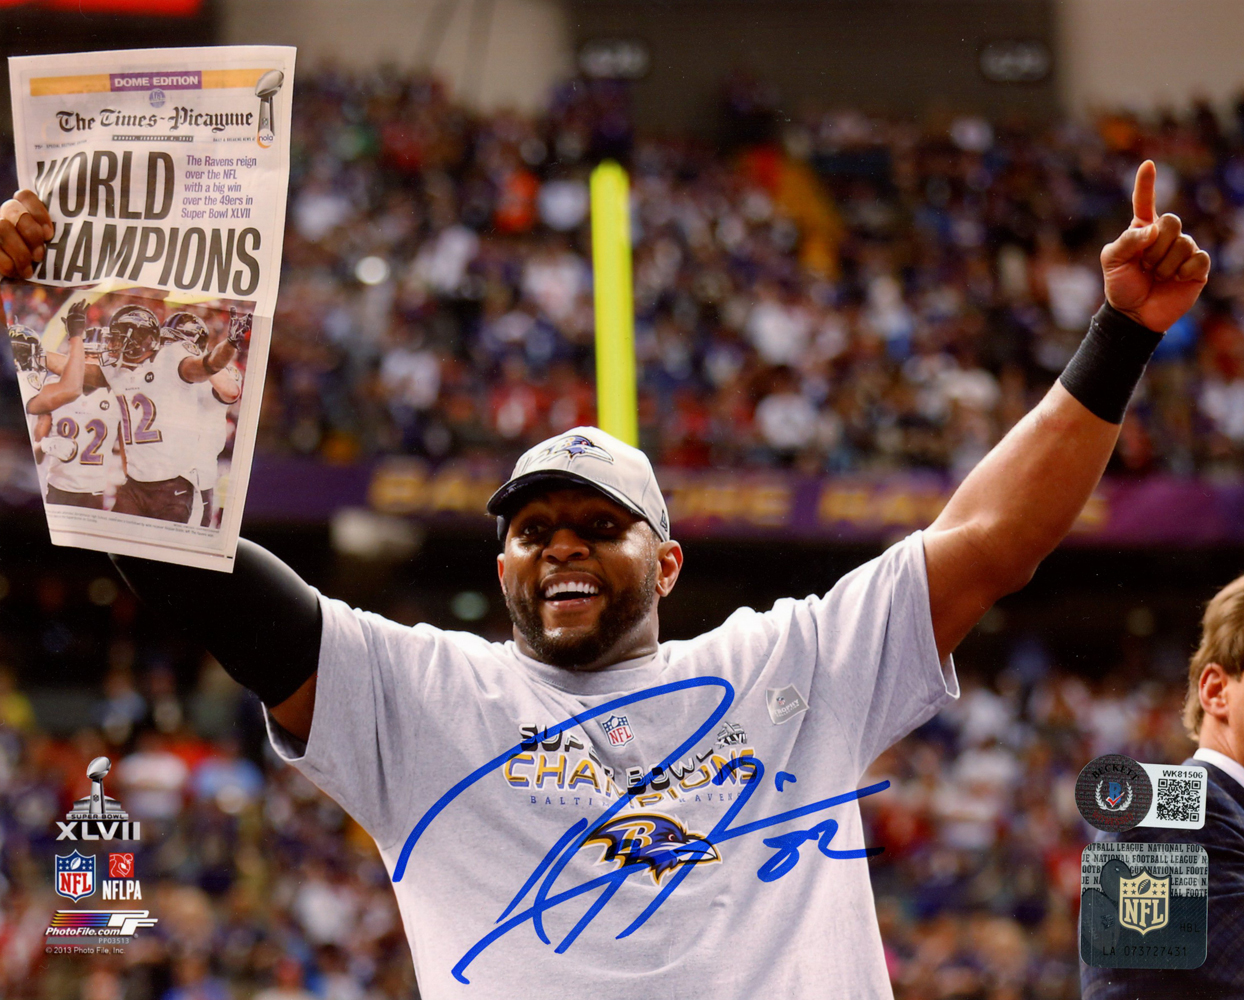 Ray Lewis Autographed/Signed Baltimore Ravens 8x10 Photo Beckett BAS